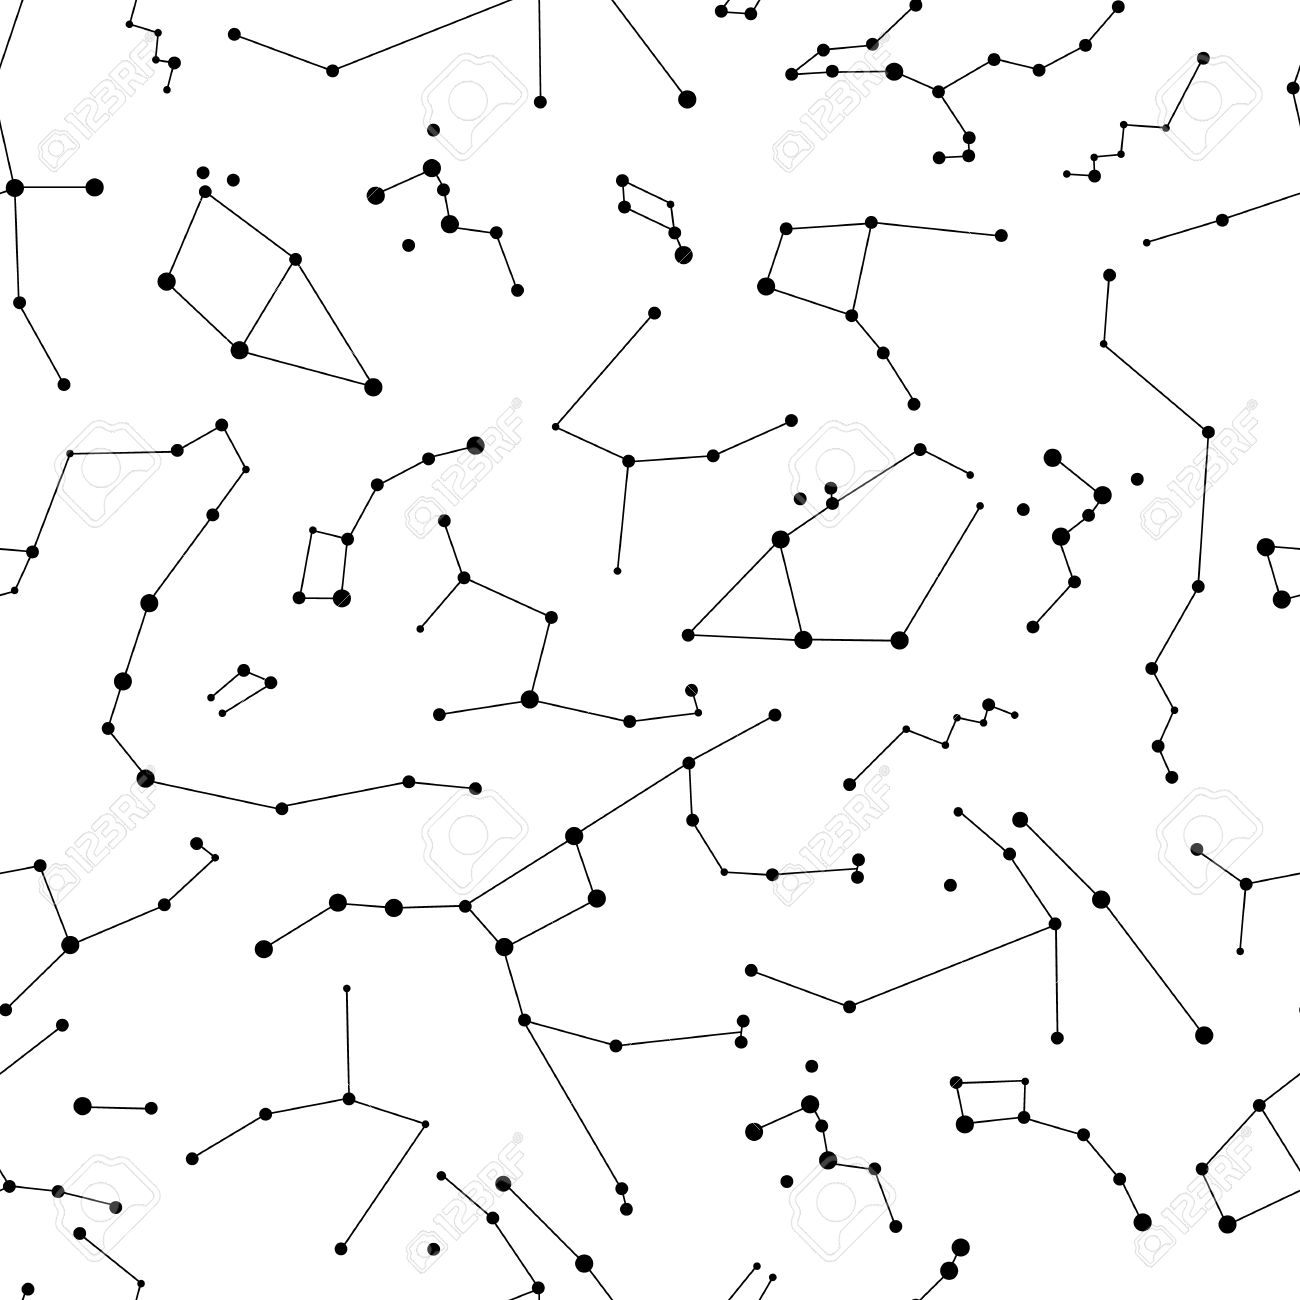 Constellation Drawing Artistic Sketching